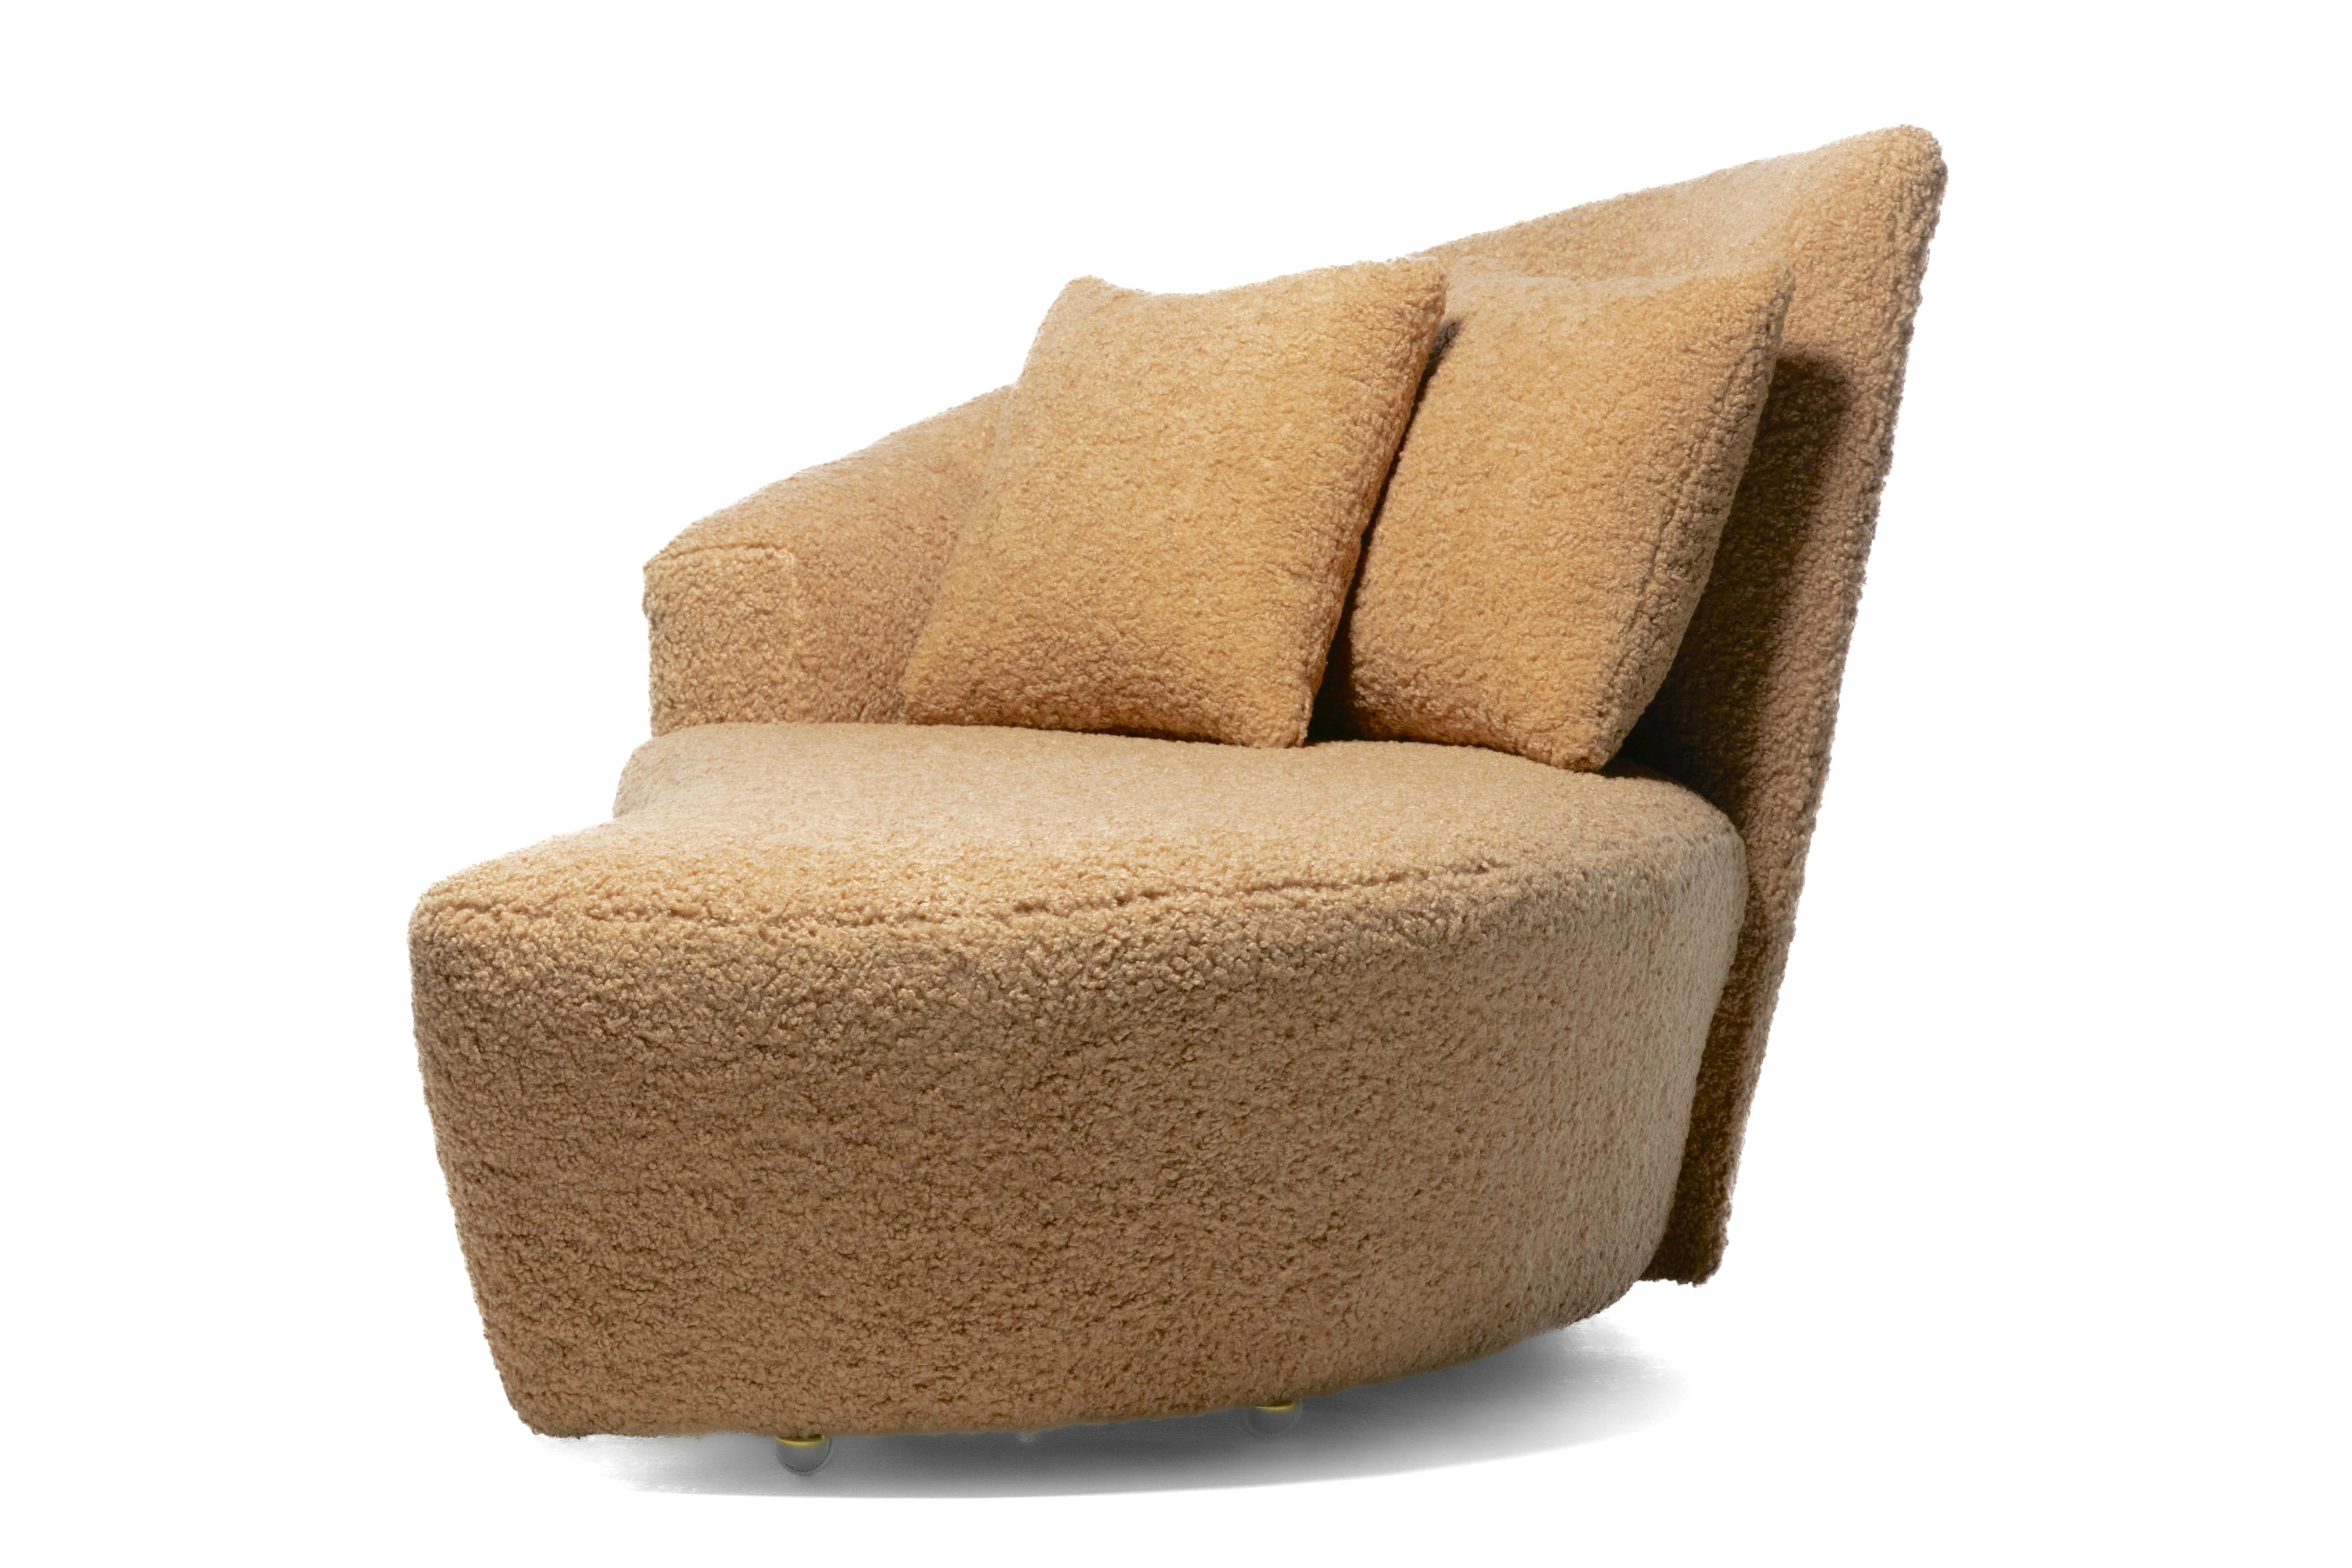 Vladimir Kagan Bilbao Swiveling Chaise Lounge in Luxurious Latte Bouclé In Good Condition For Sale In Saint Louis, MO